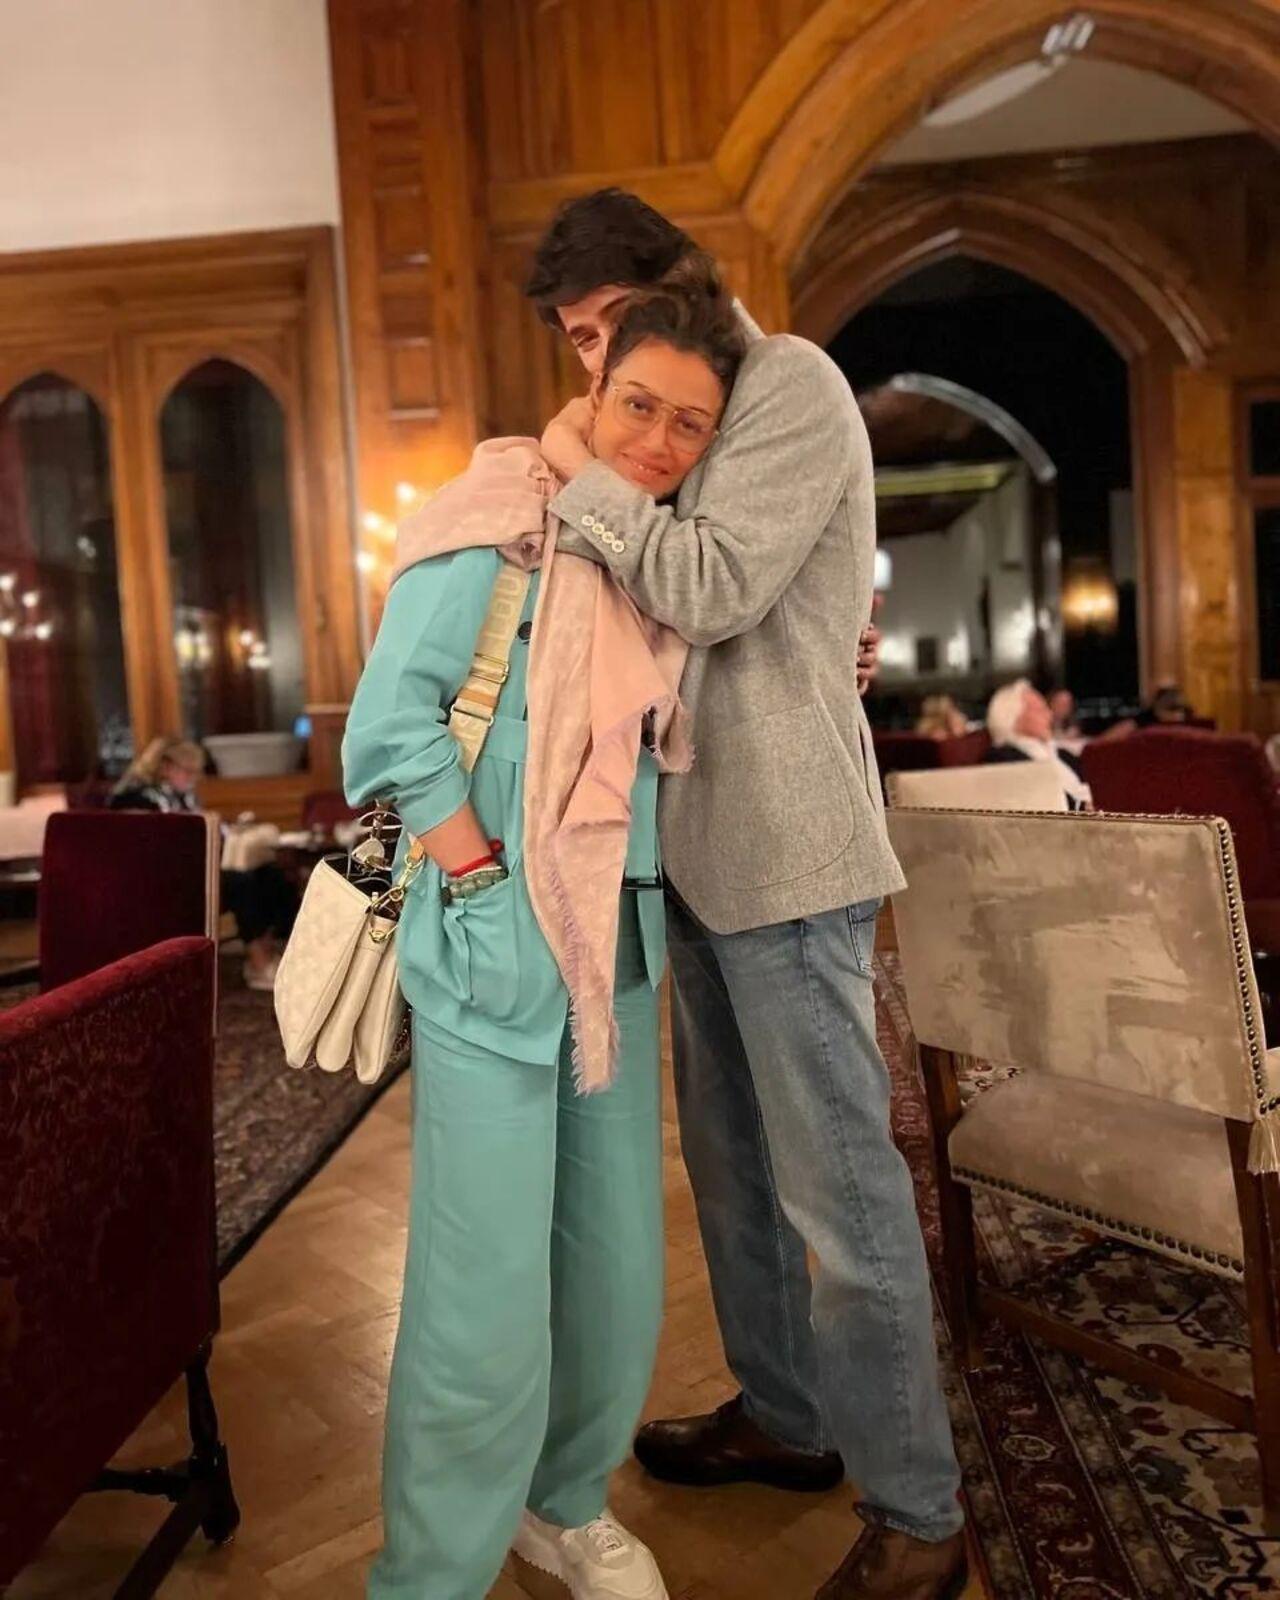 A hug from a loved one has the power to change the course of a bad day and it seems like Mahesh Babu's hug was an instant moodlifter for Namrata